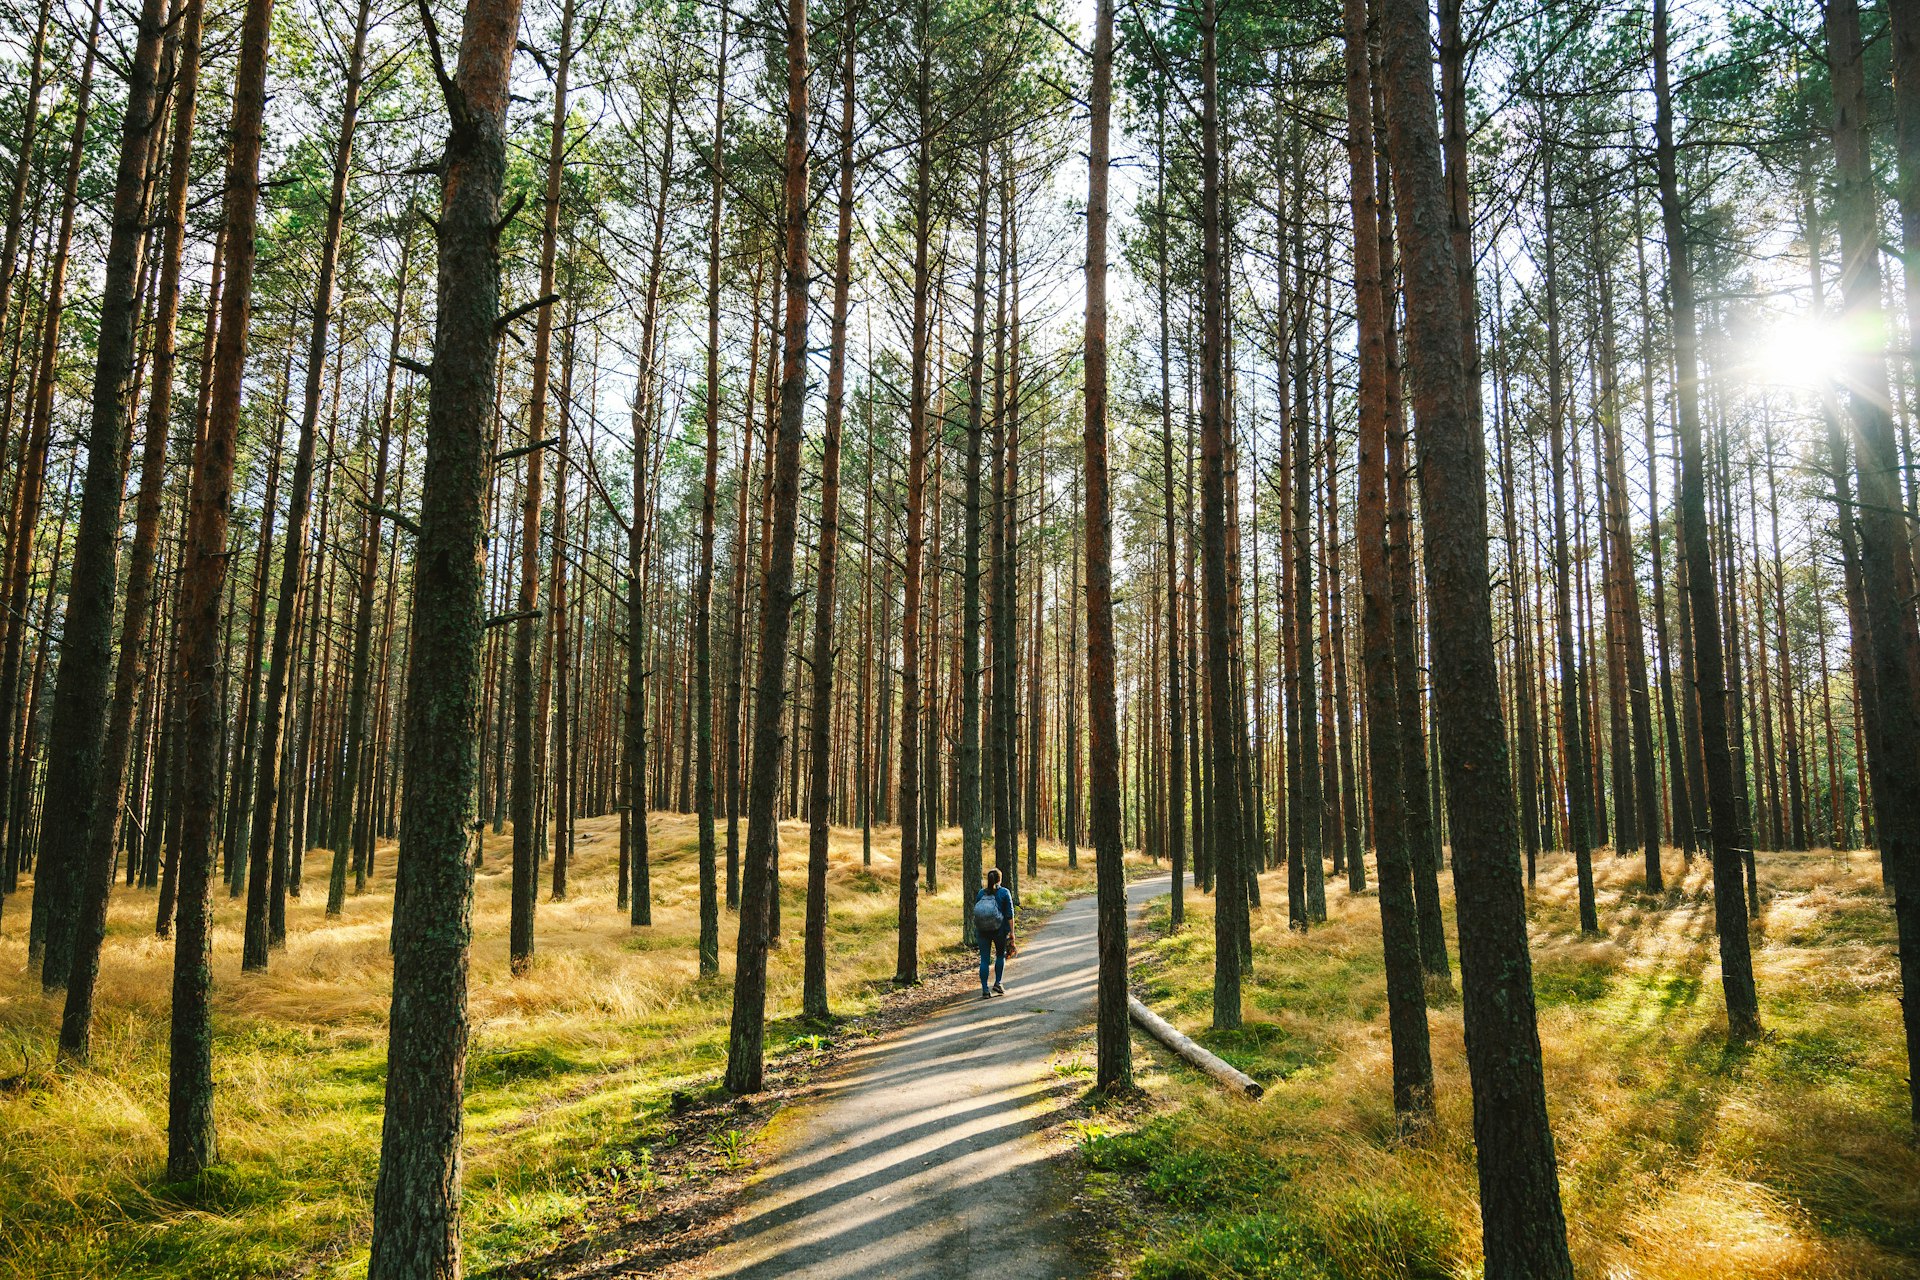 A person hikes through pine trees in Smiltyne, Curonian Spit, Lithuania